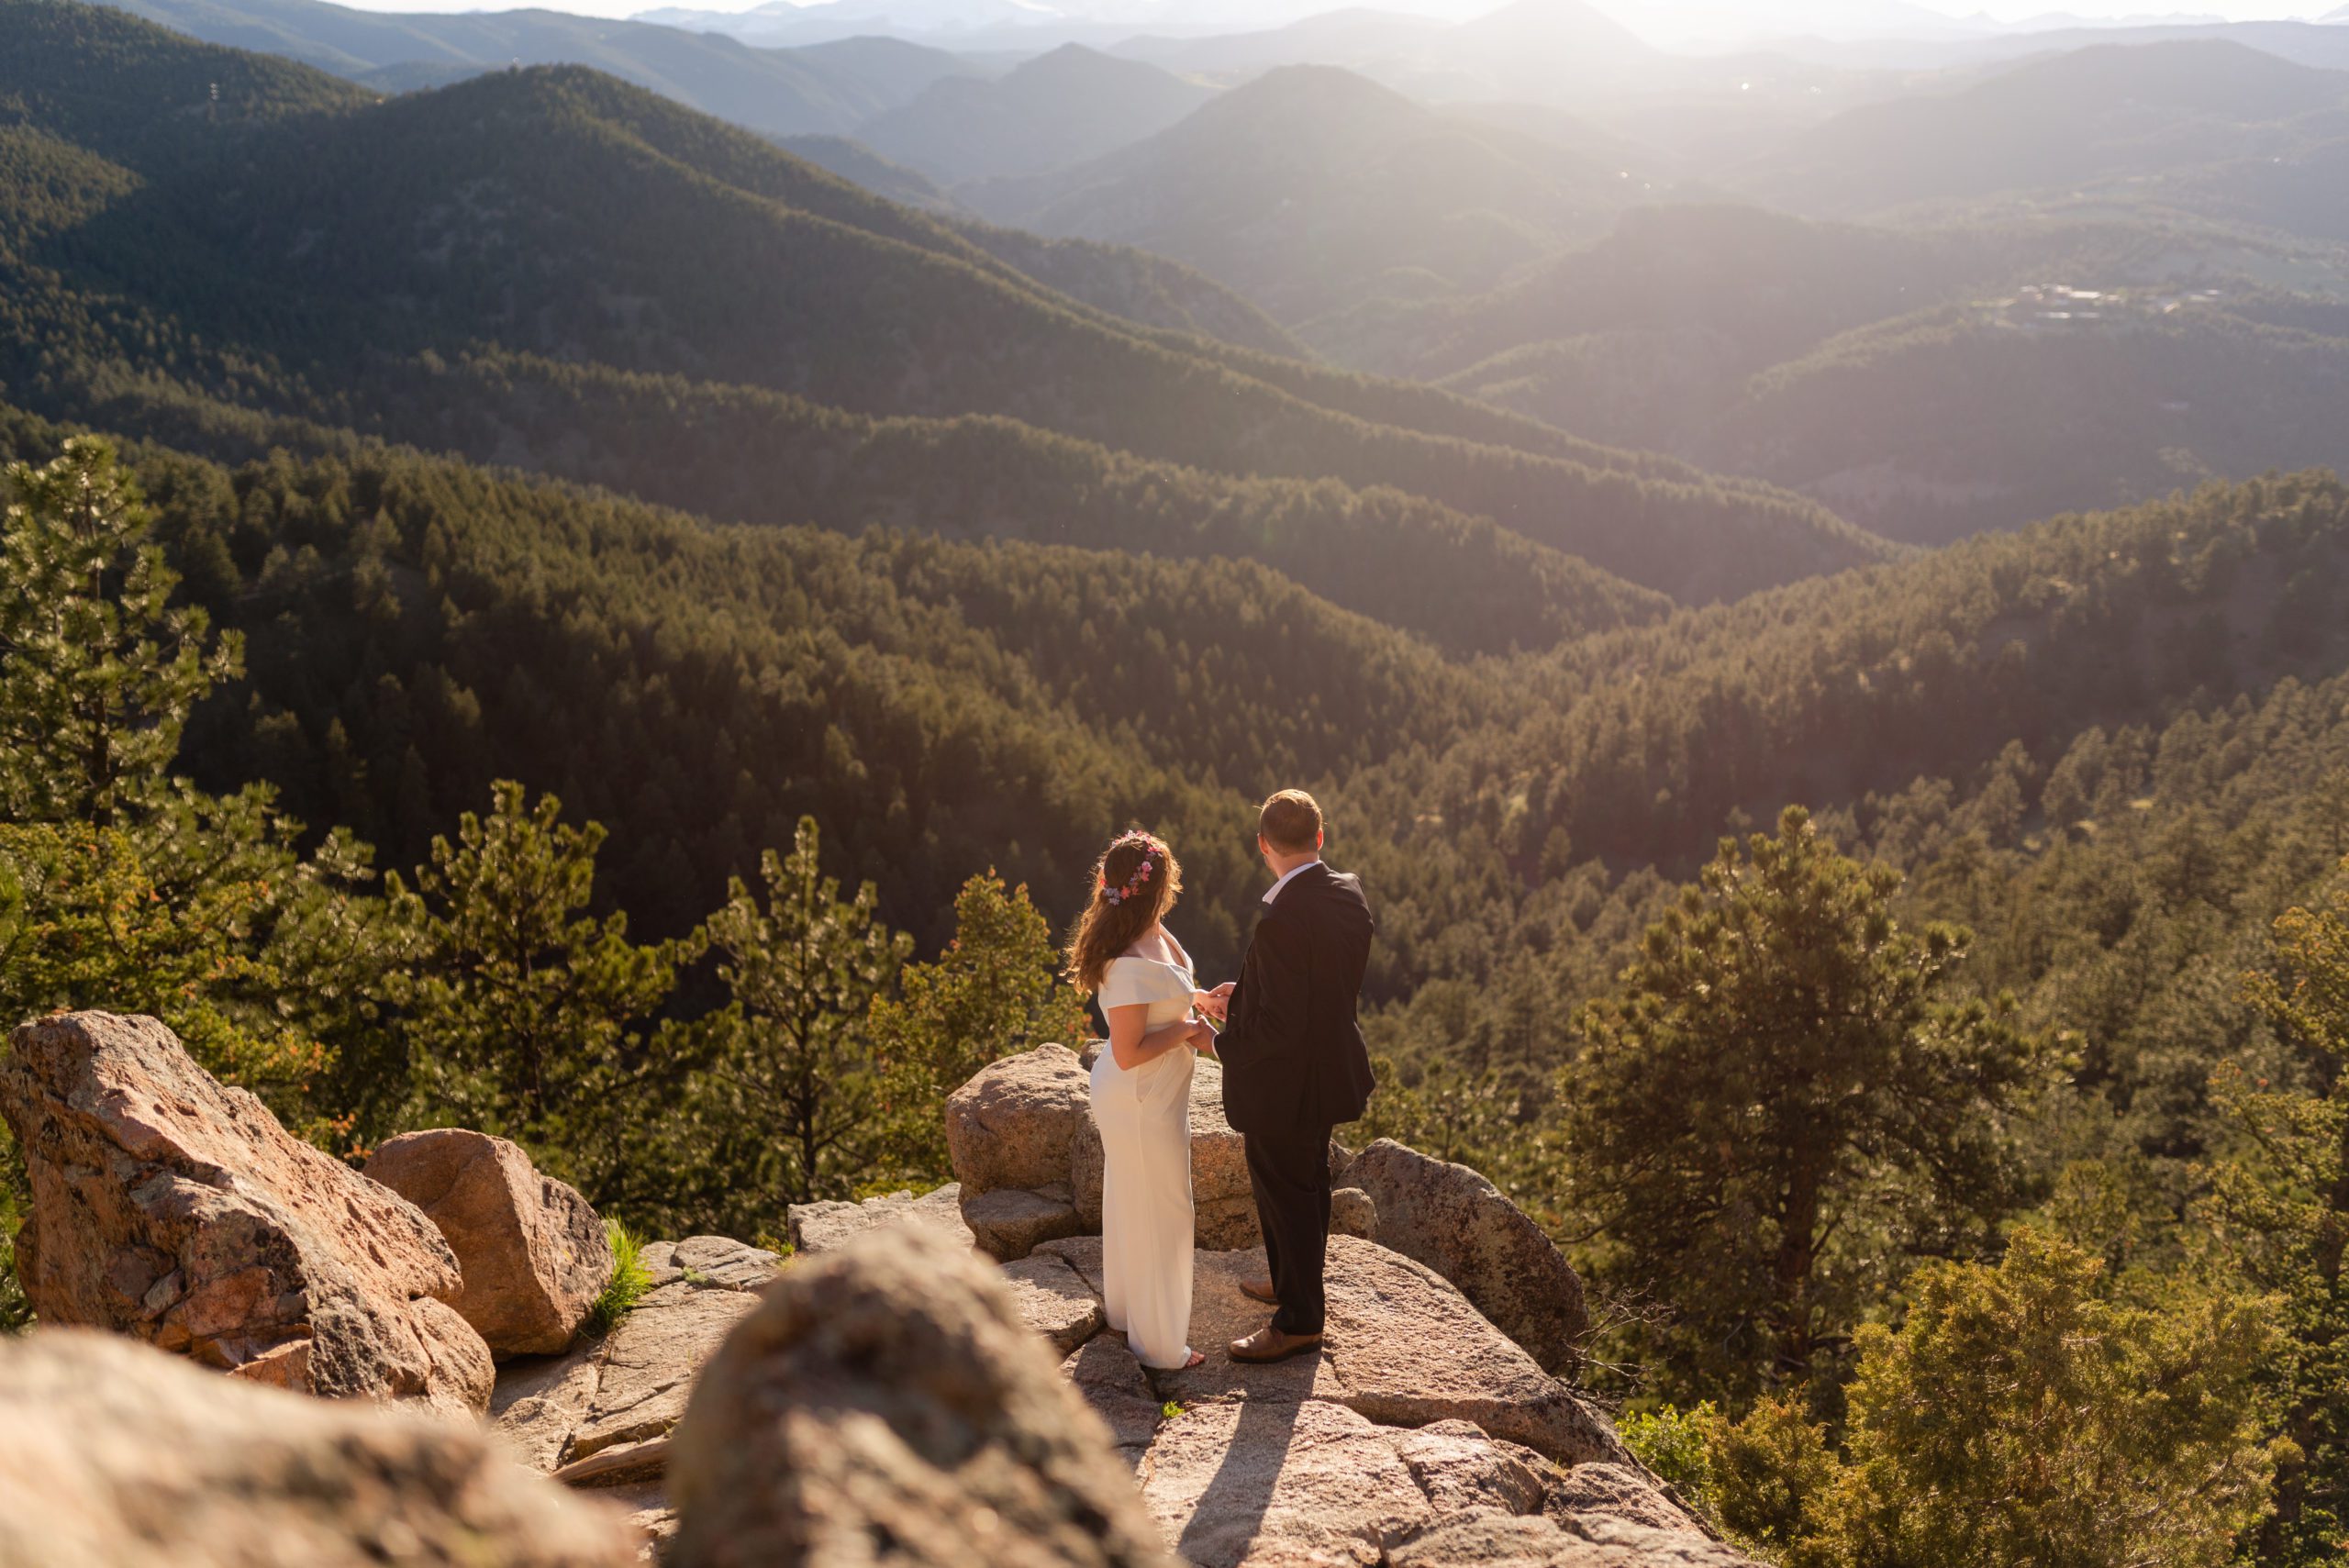 The bride and groom look out into the valley below during their Boulder hiking elopement near realization point.